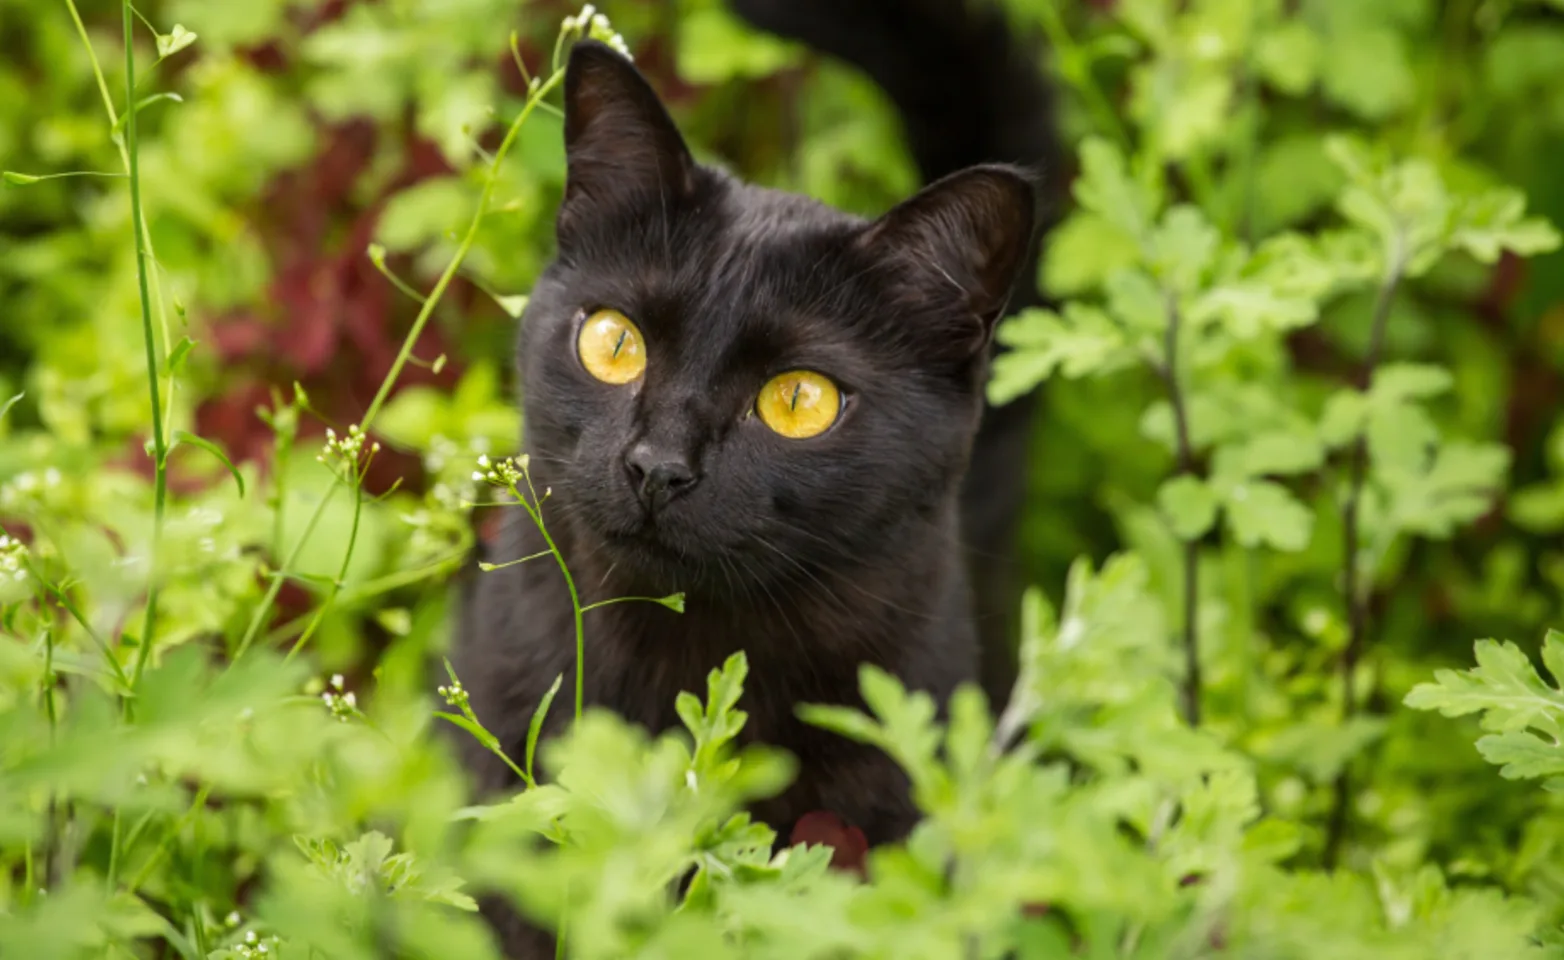 Black Cat In Grass Looking at Camera